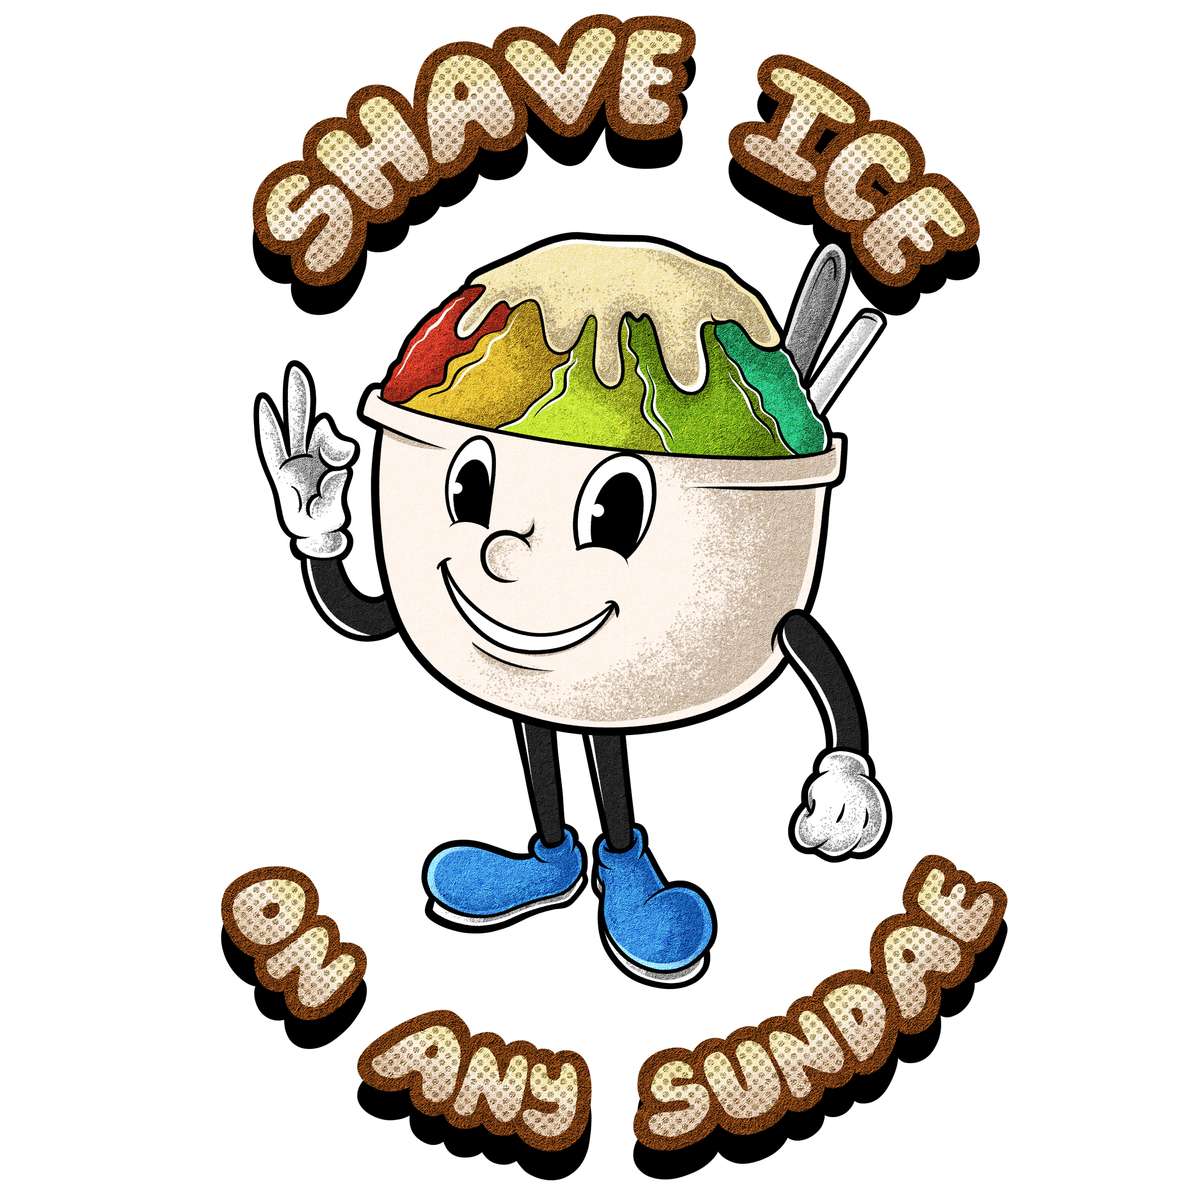 Oas shave ice picture online puzzle